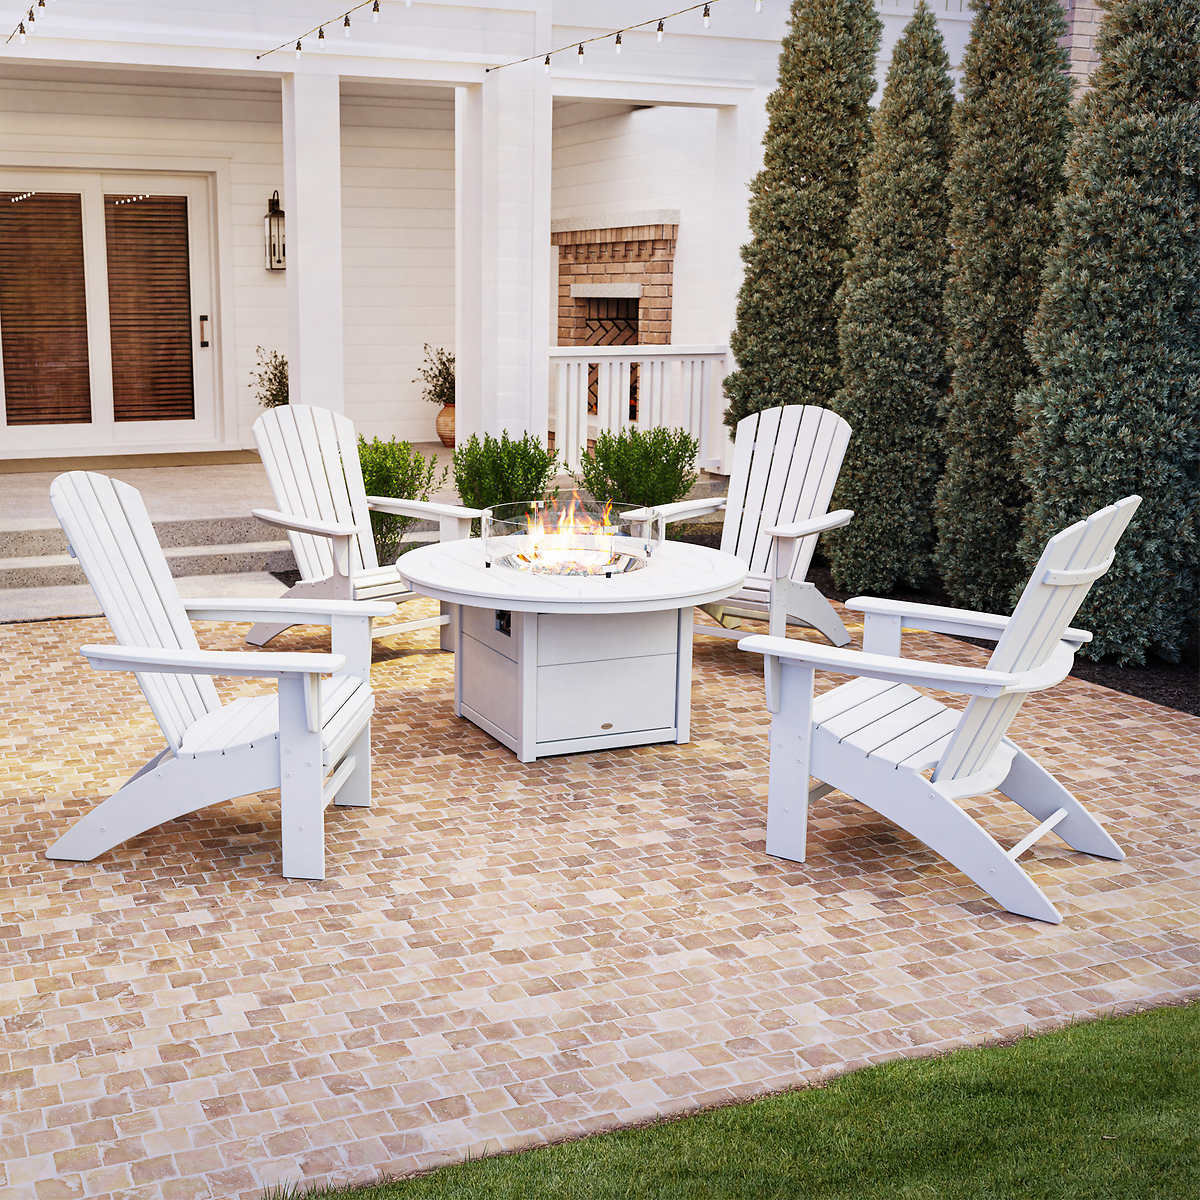 Portside 5 Piece Sback Fire, Polywood Fire Pit Table Reviews